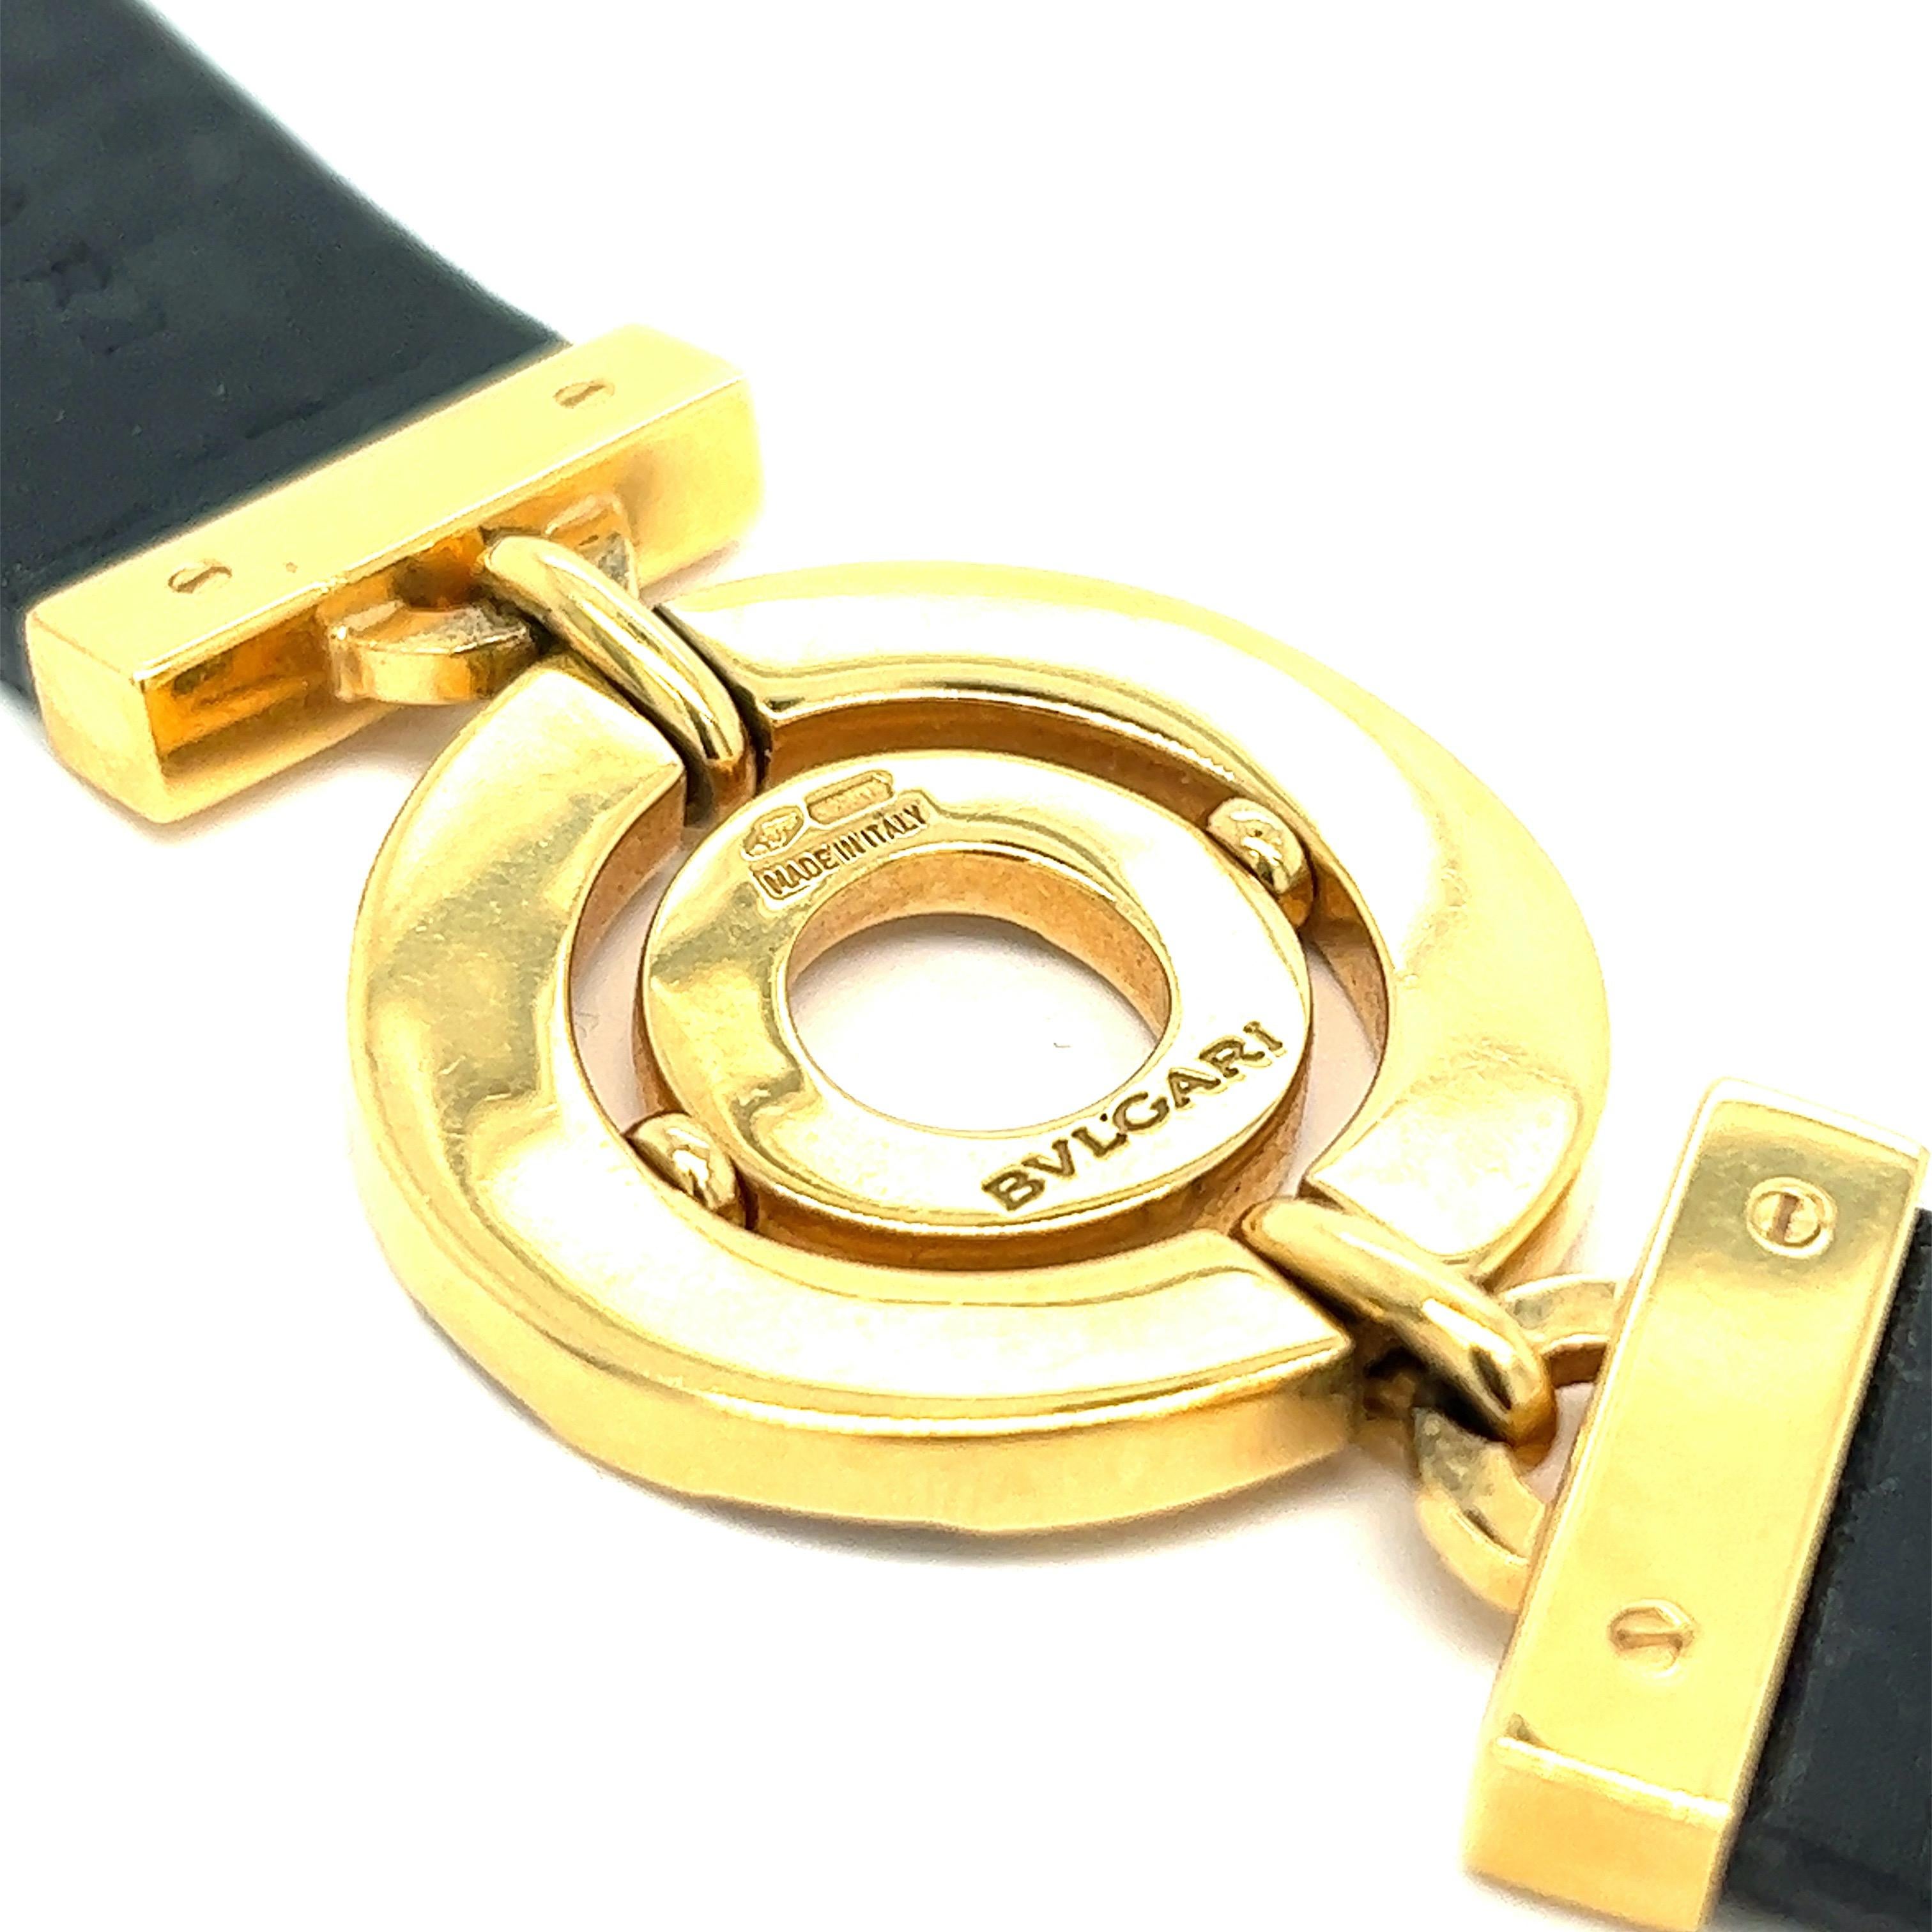 Bvlgari Gold Diamond Leather Bracelet In Excellent Condition For Sale In New York, NY